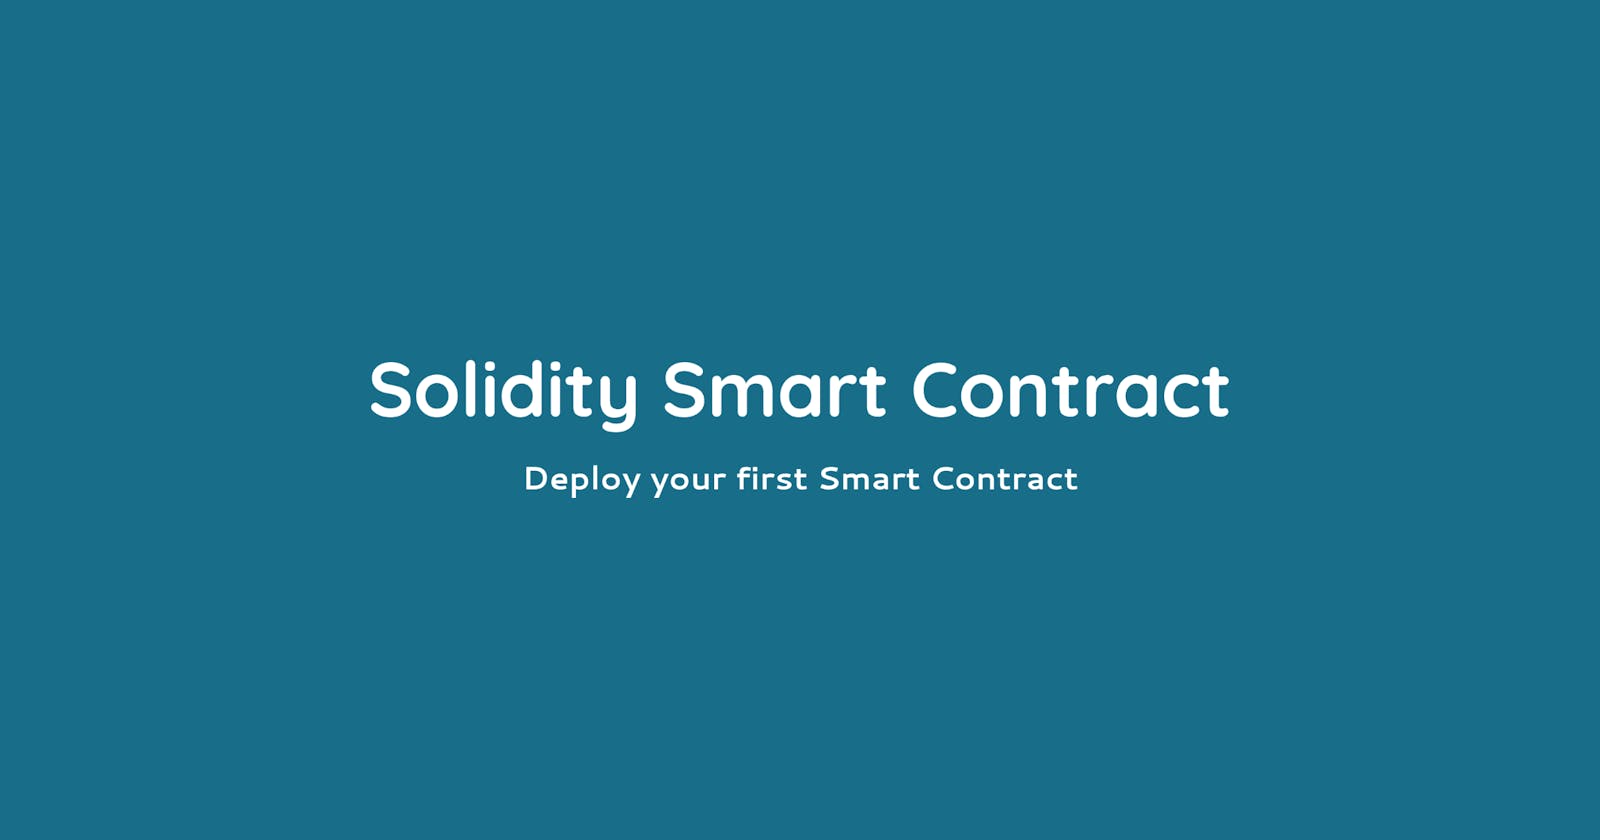 Deploy your first smart contract in Ethereum network